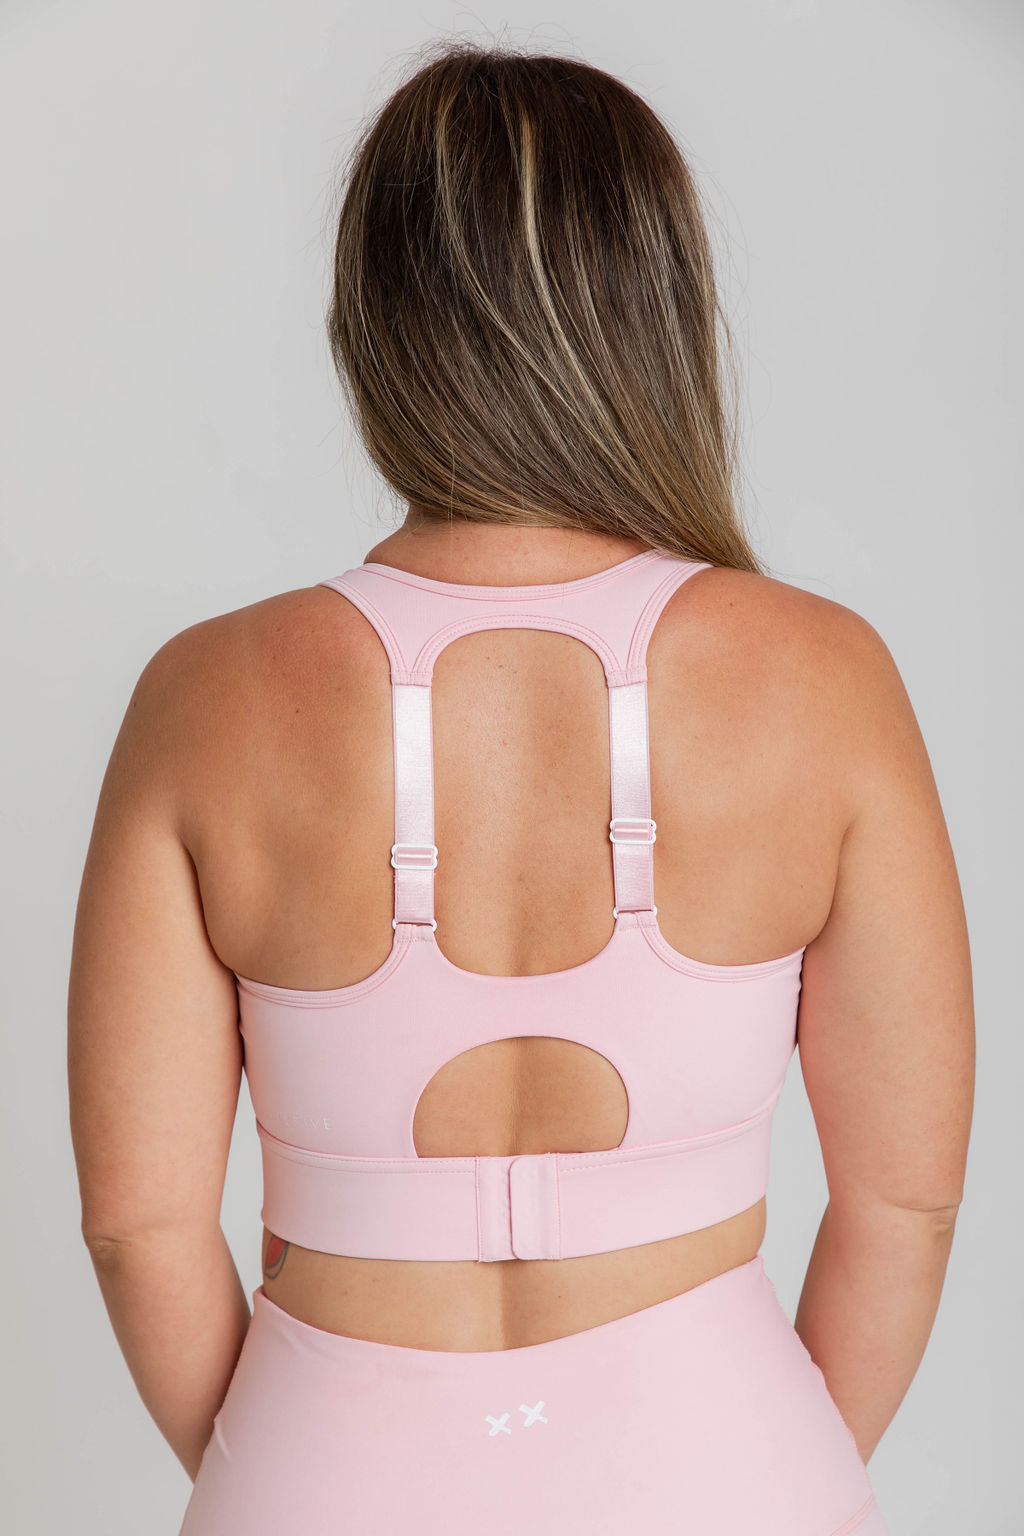 BEYOND SPORTS BRA - "THE ULTIMATE" MAXIMUM SUPPORT + MAX COVERAGE - BABY PINK